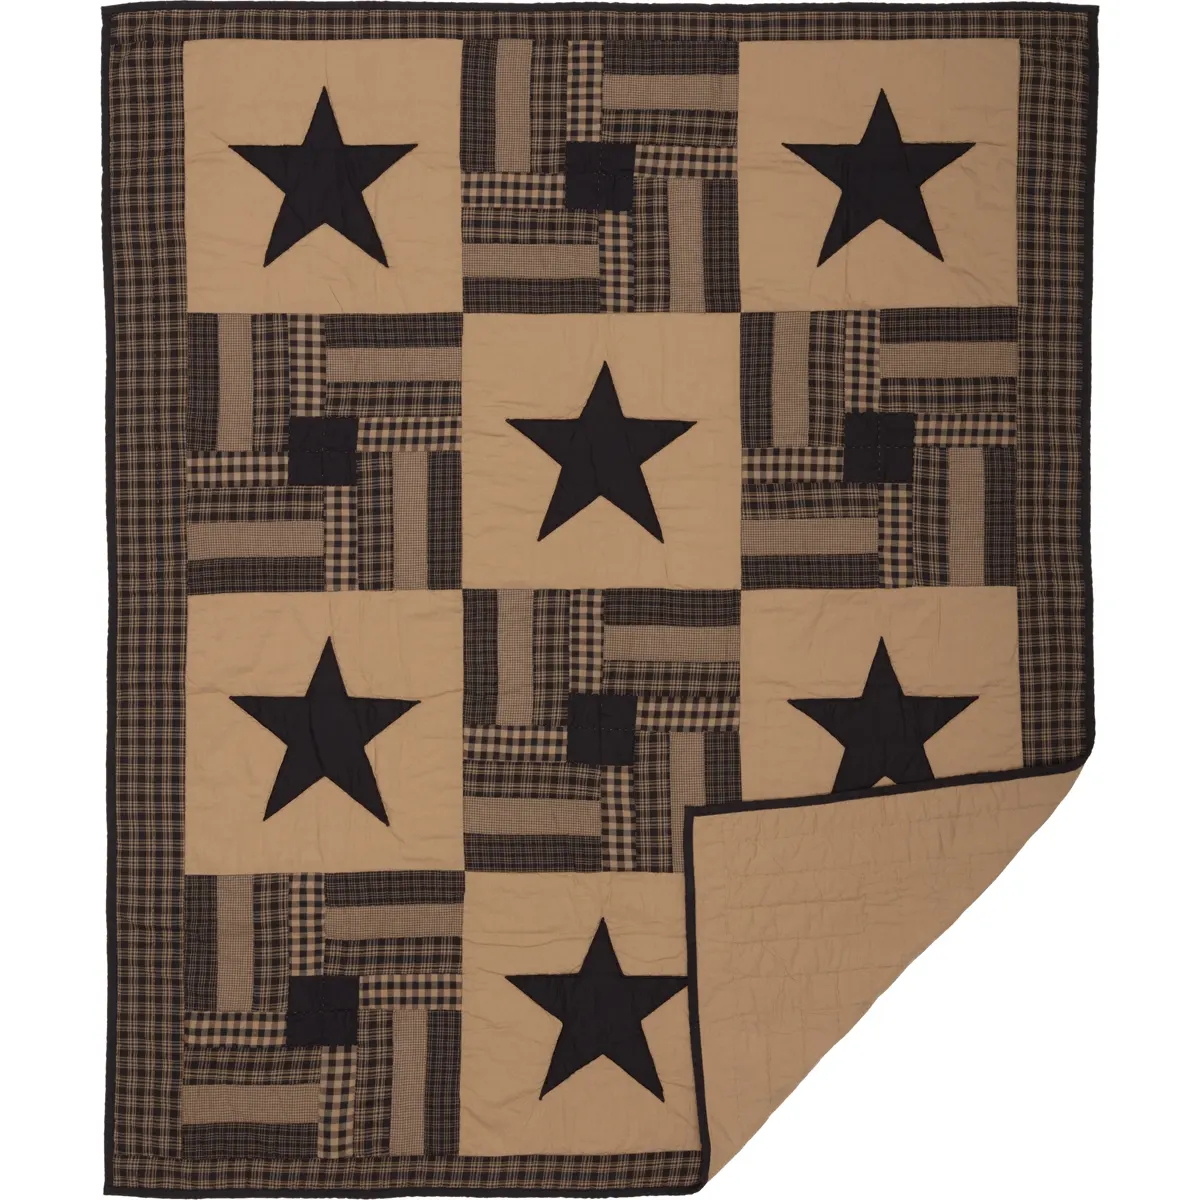 Black Check Star Quilted Throw 60x50 flat